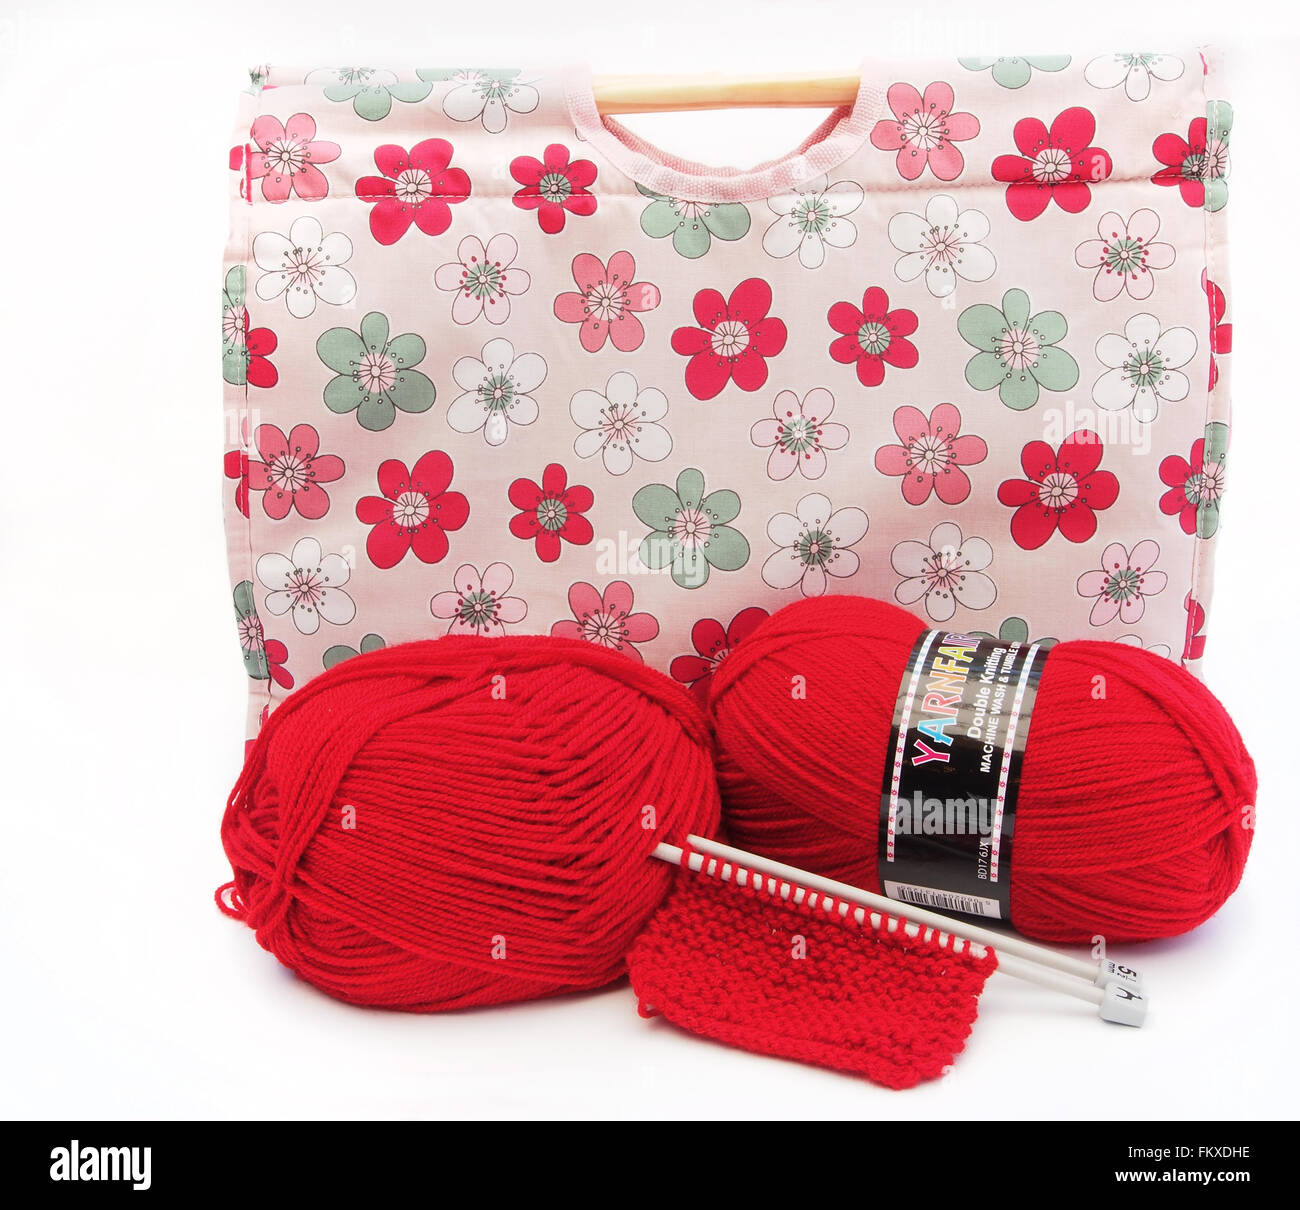 Pink flower patterned knitting / craft bag with knitting needles, knitting and two red balls of wool. Stock Photo